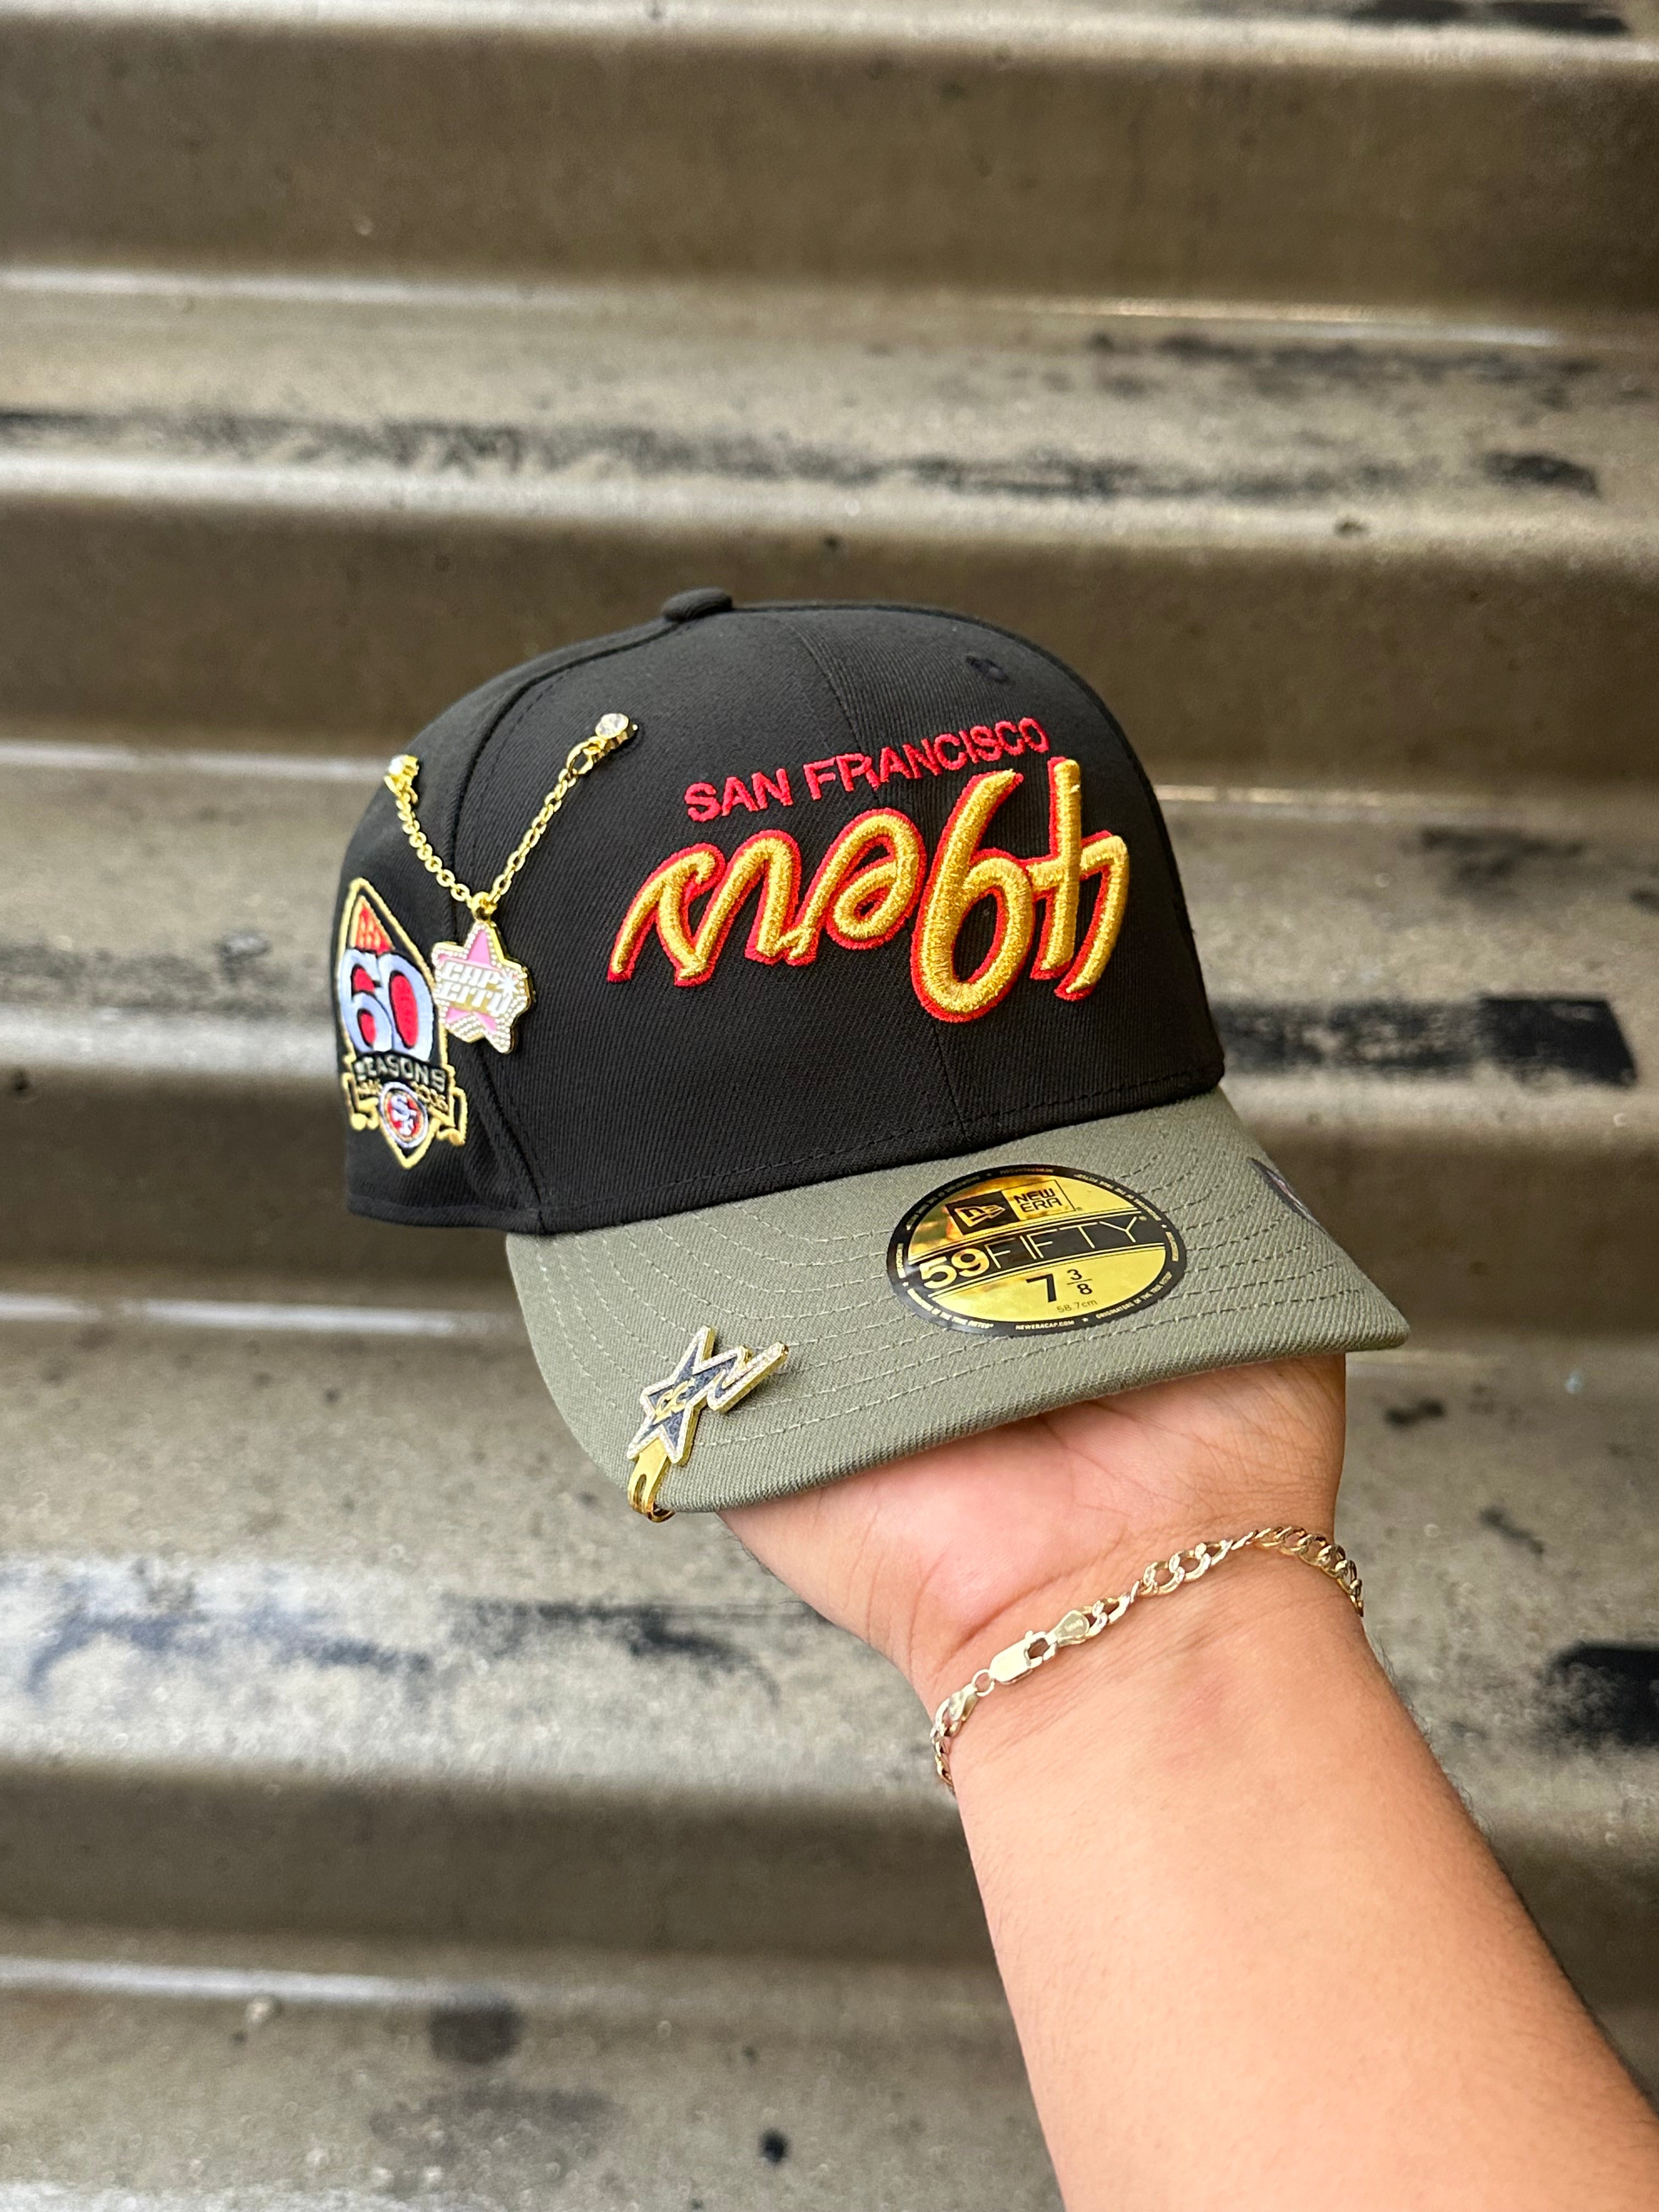 NEW ERA EXCLUSIVE 59FIFTY BLACK/OLIVE UPSIDE DOWN SAN FRANSICO "49ERS" SCRIPT W/ 60TH SEASON SIDE PATCH